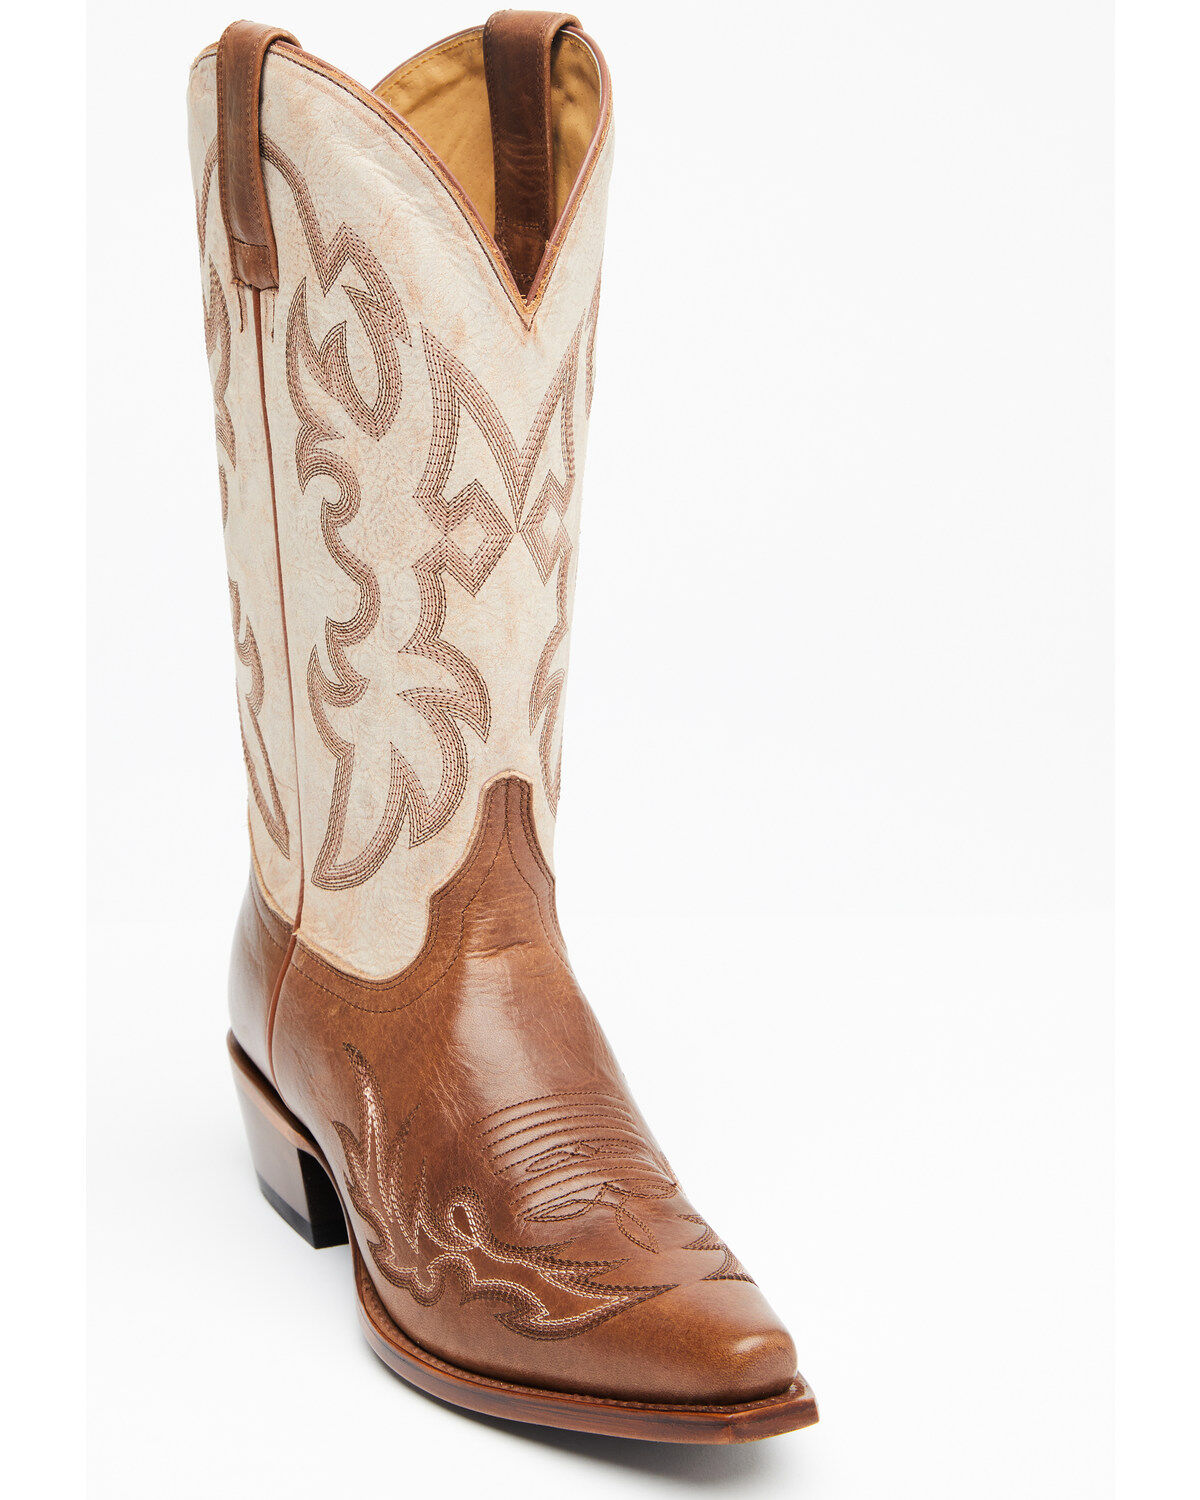 size 14 ee cowboy boots